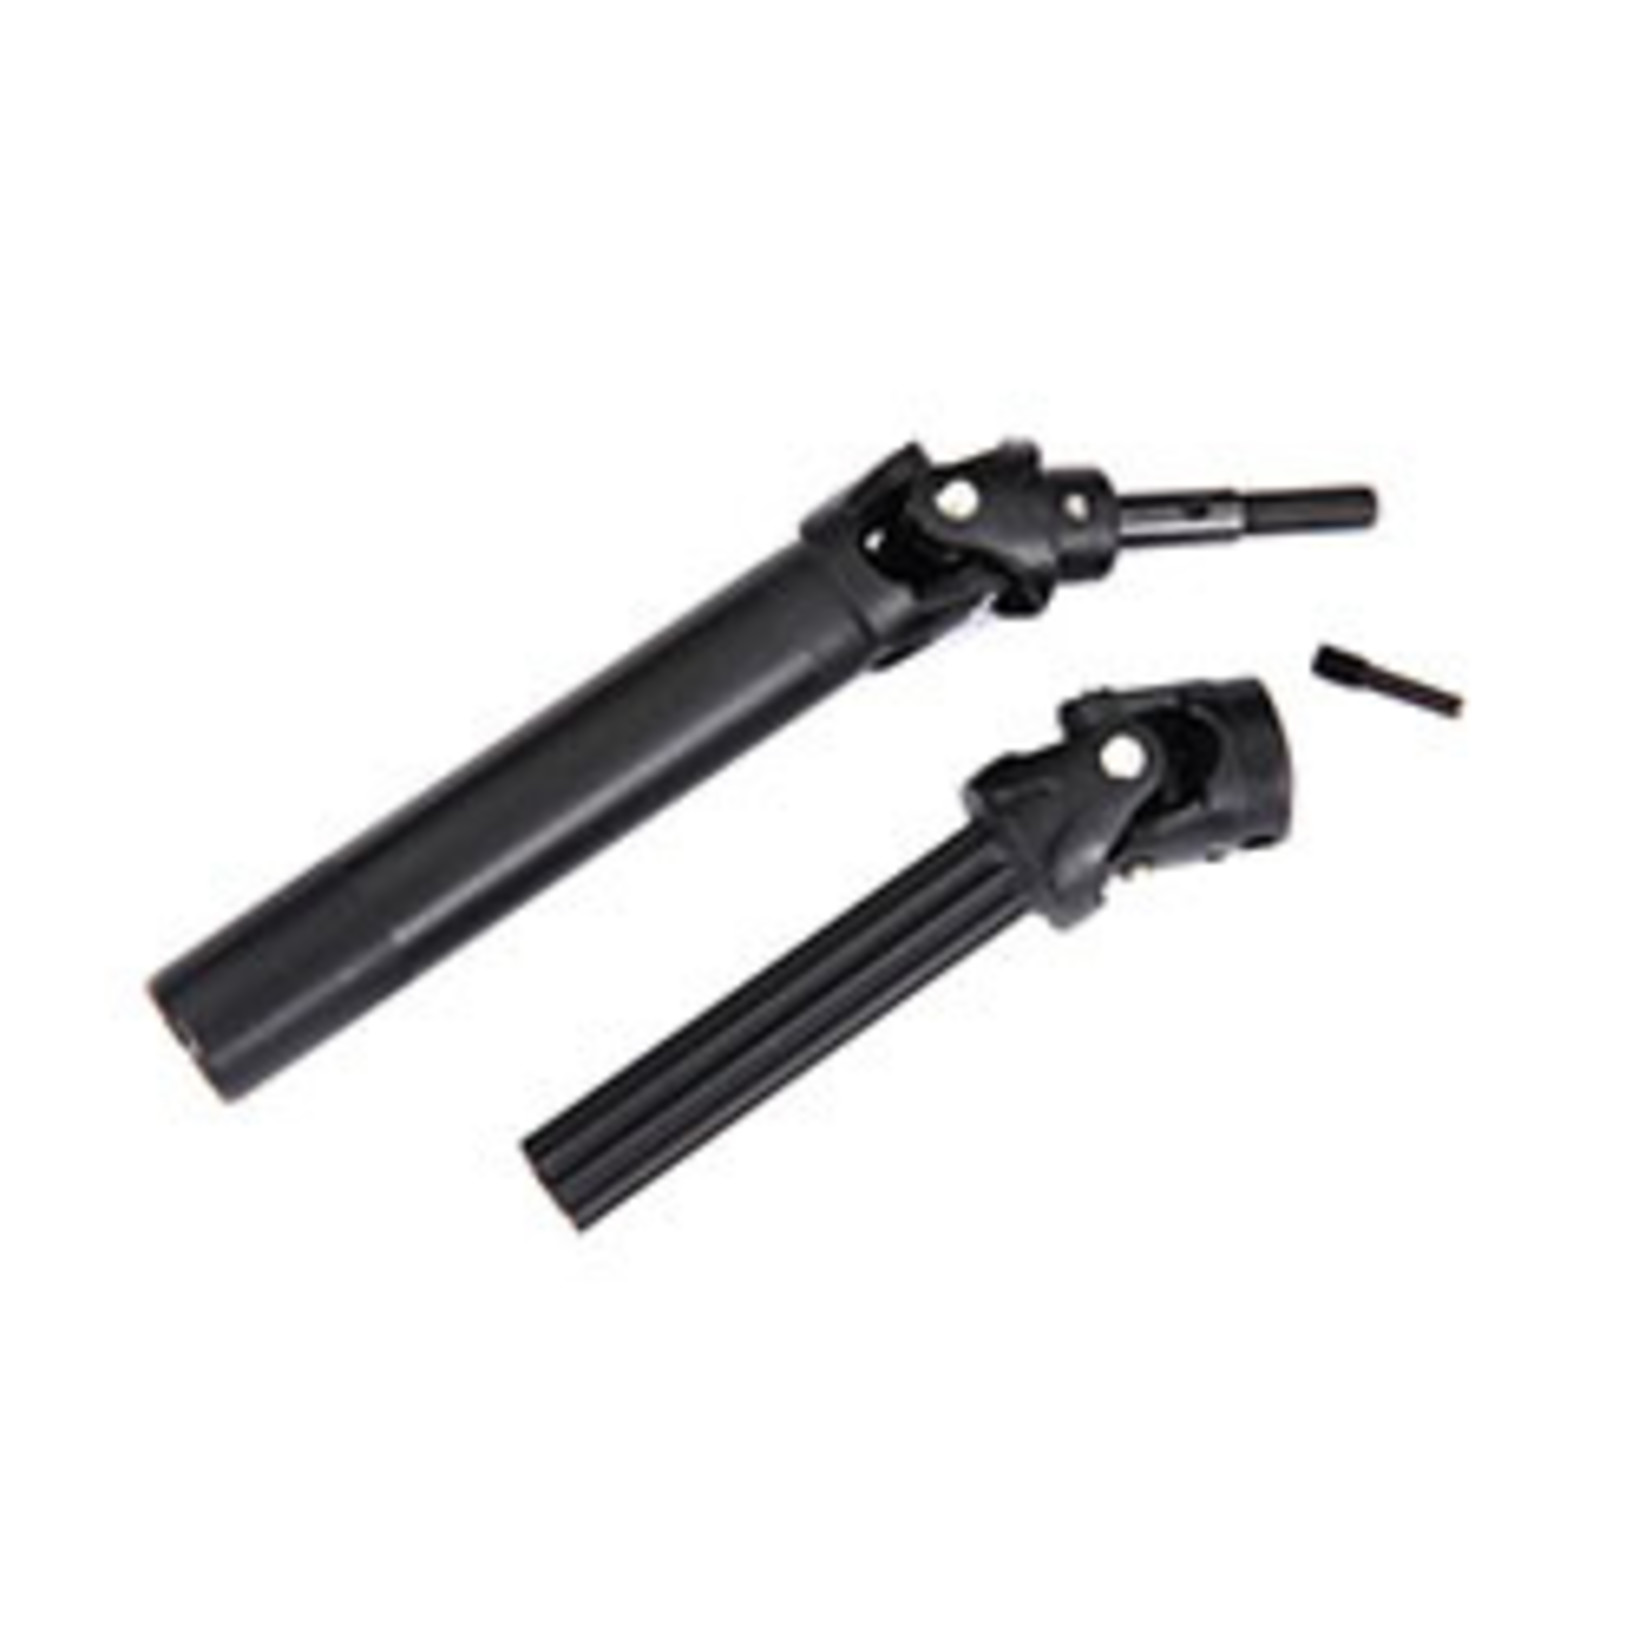 Traxxas Driveshaft assembly, front or rear, Maxx® Duty (1) (left or right) (fully assembled, ready to install)/ screw pin (1)